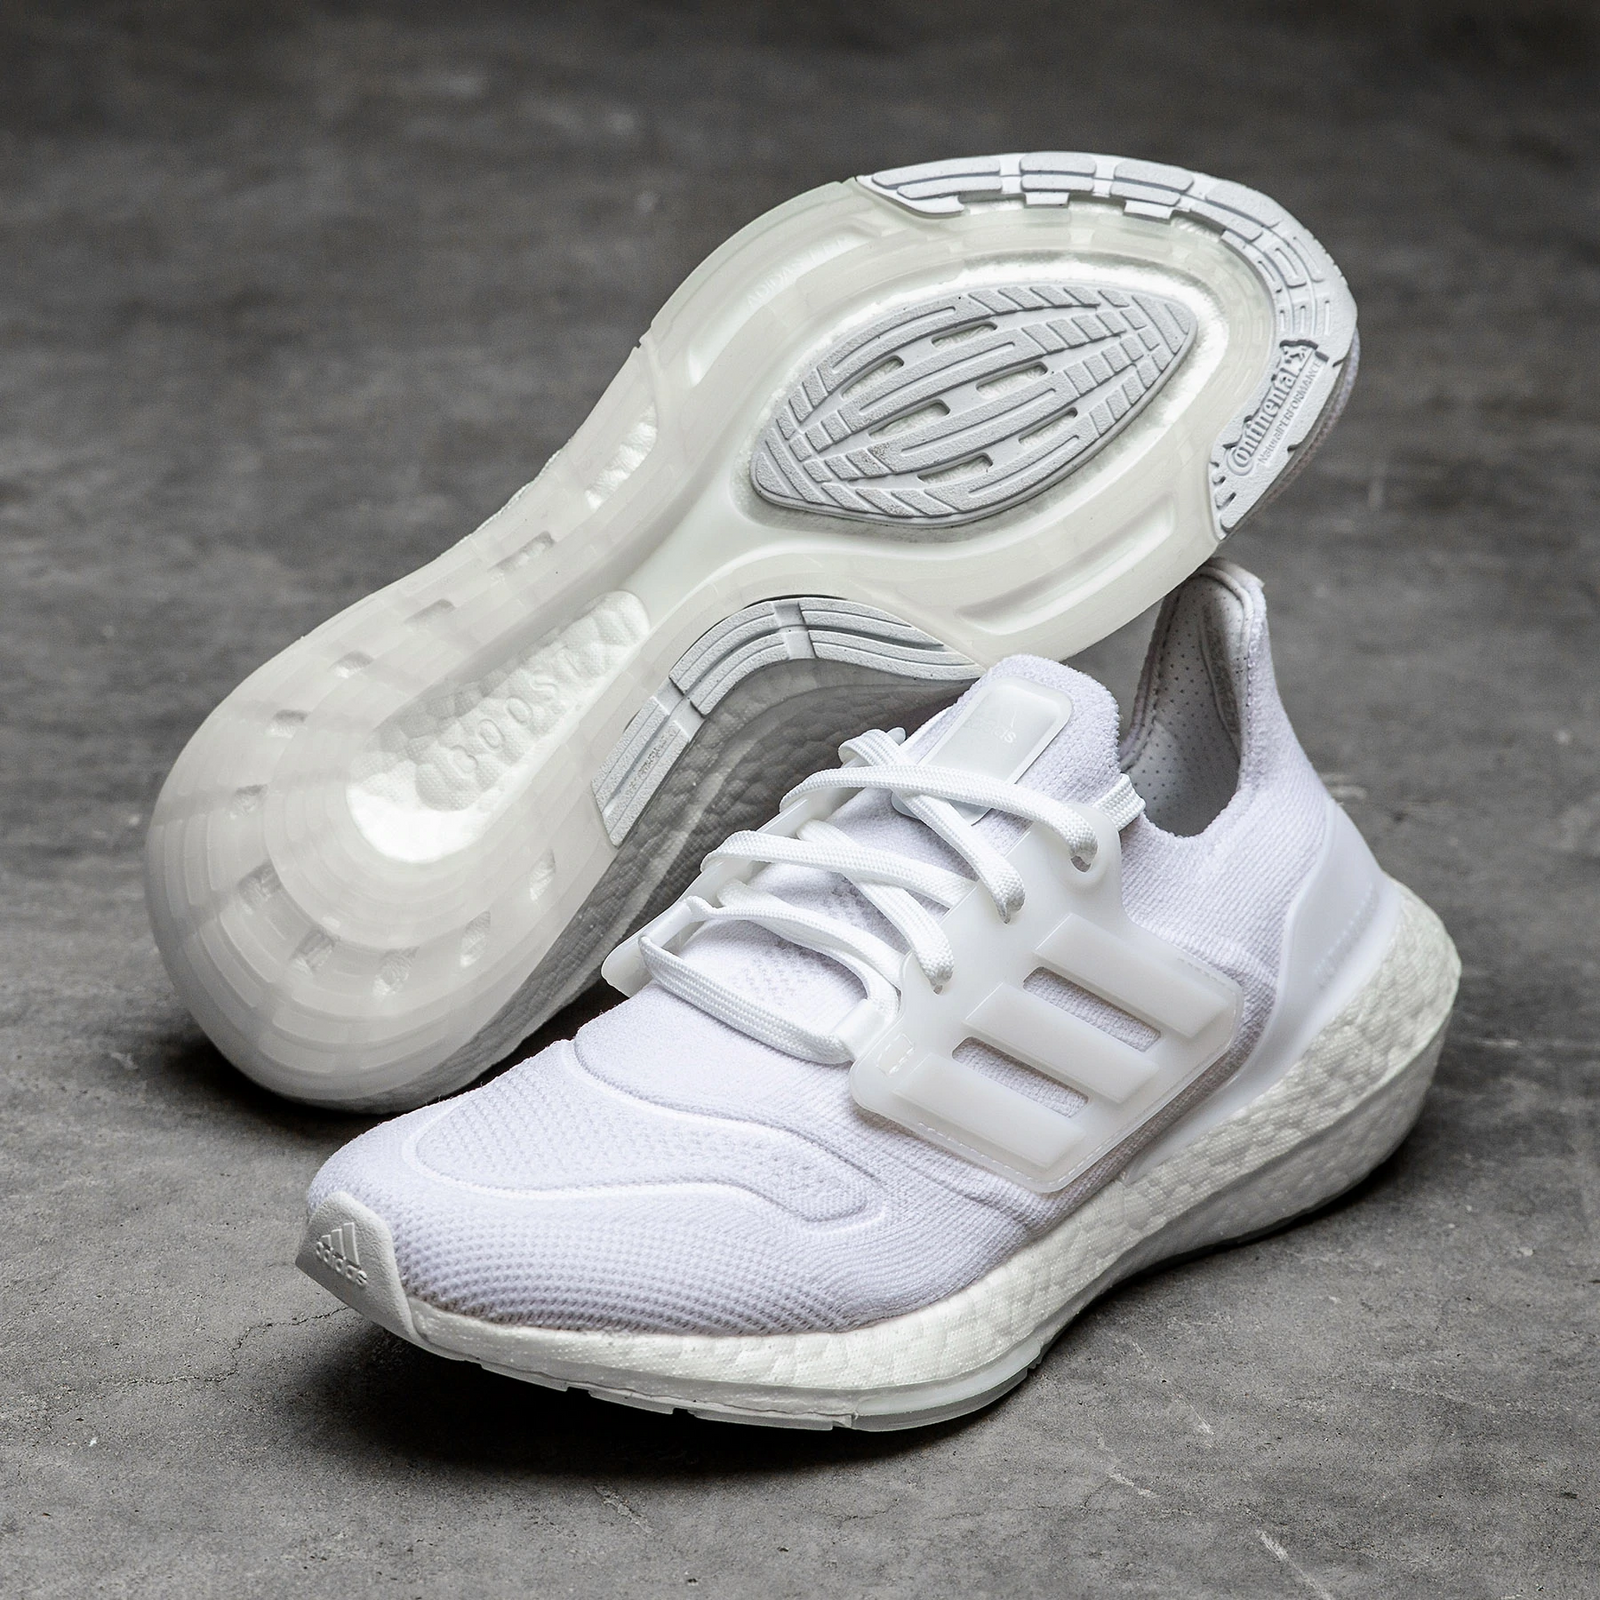 ADIDAS - ULTRABOOST 22 SHOES - WOMEN'S - CLOUD WHITE/CLOUD WHITE/CRYST thewodlife.com